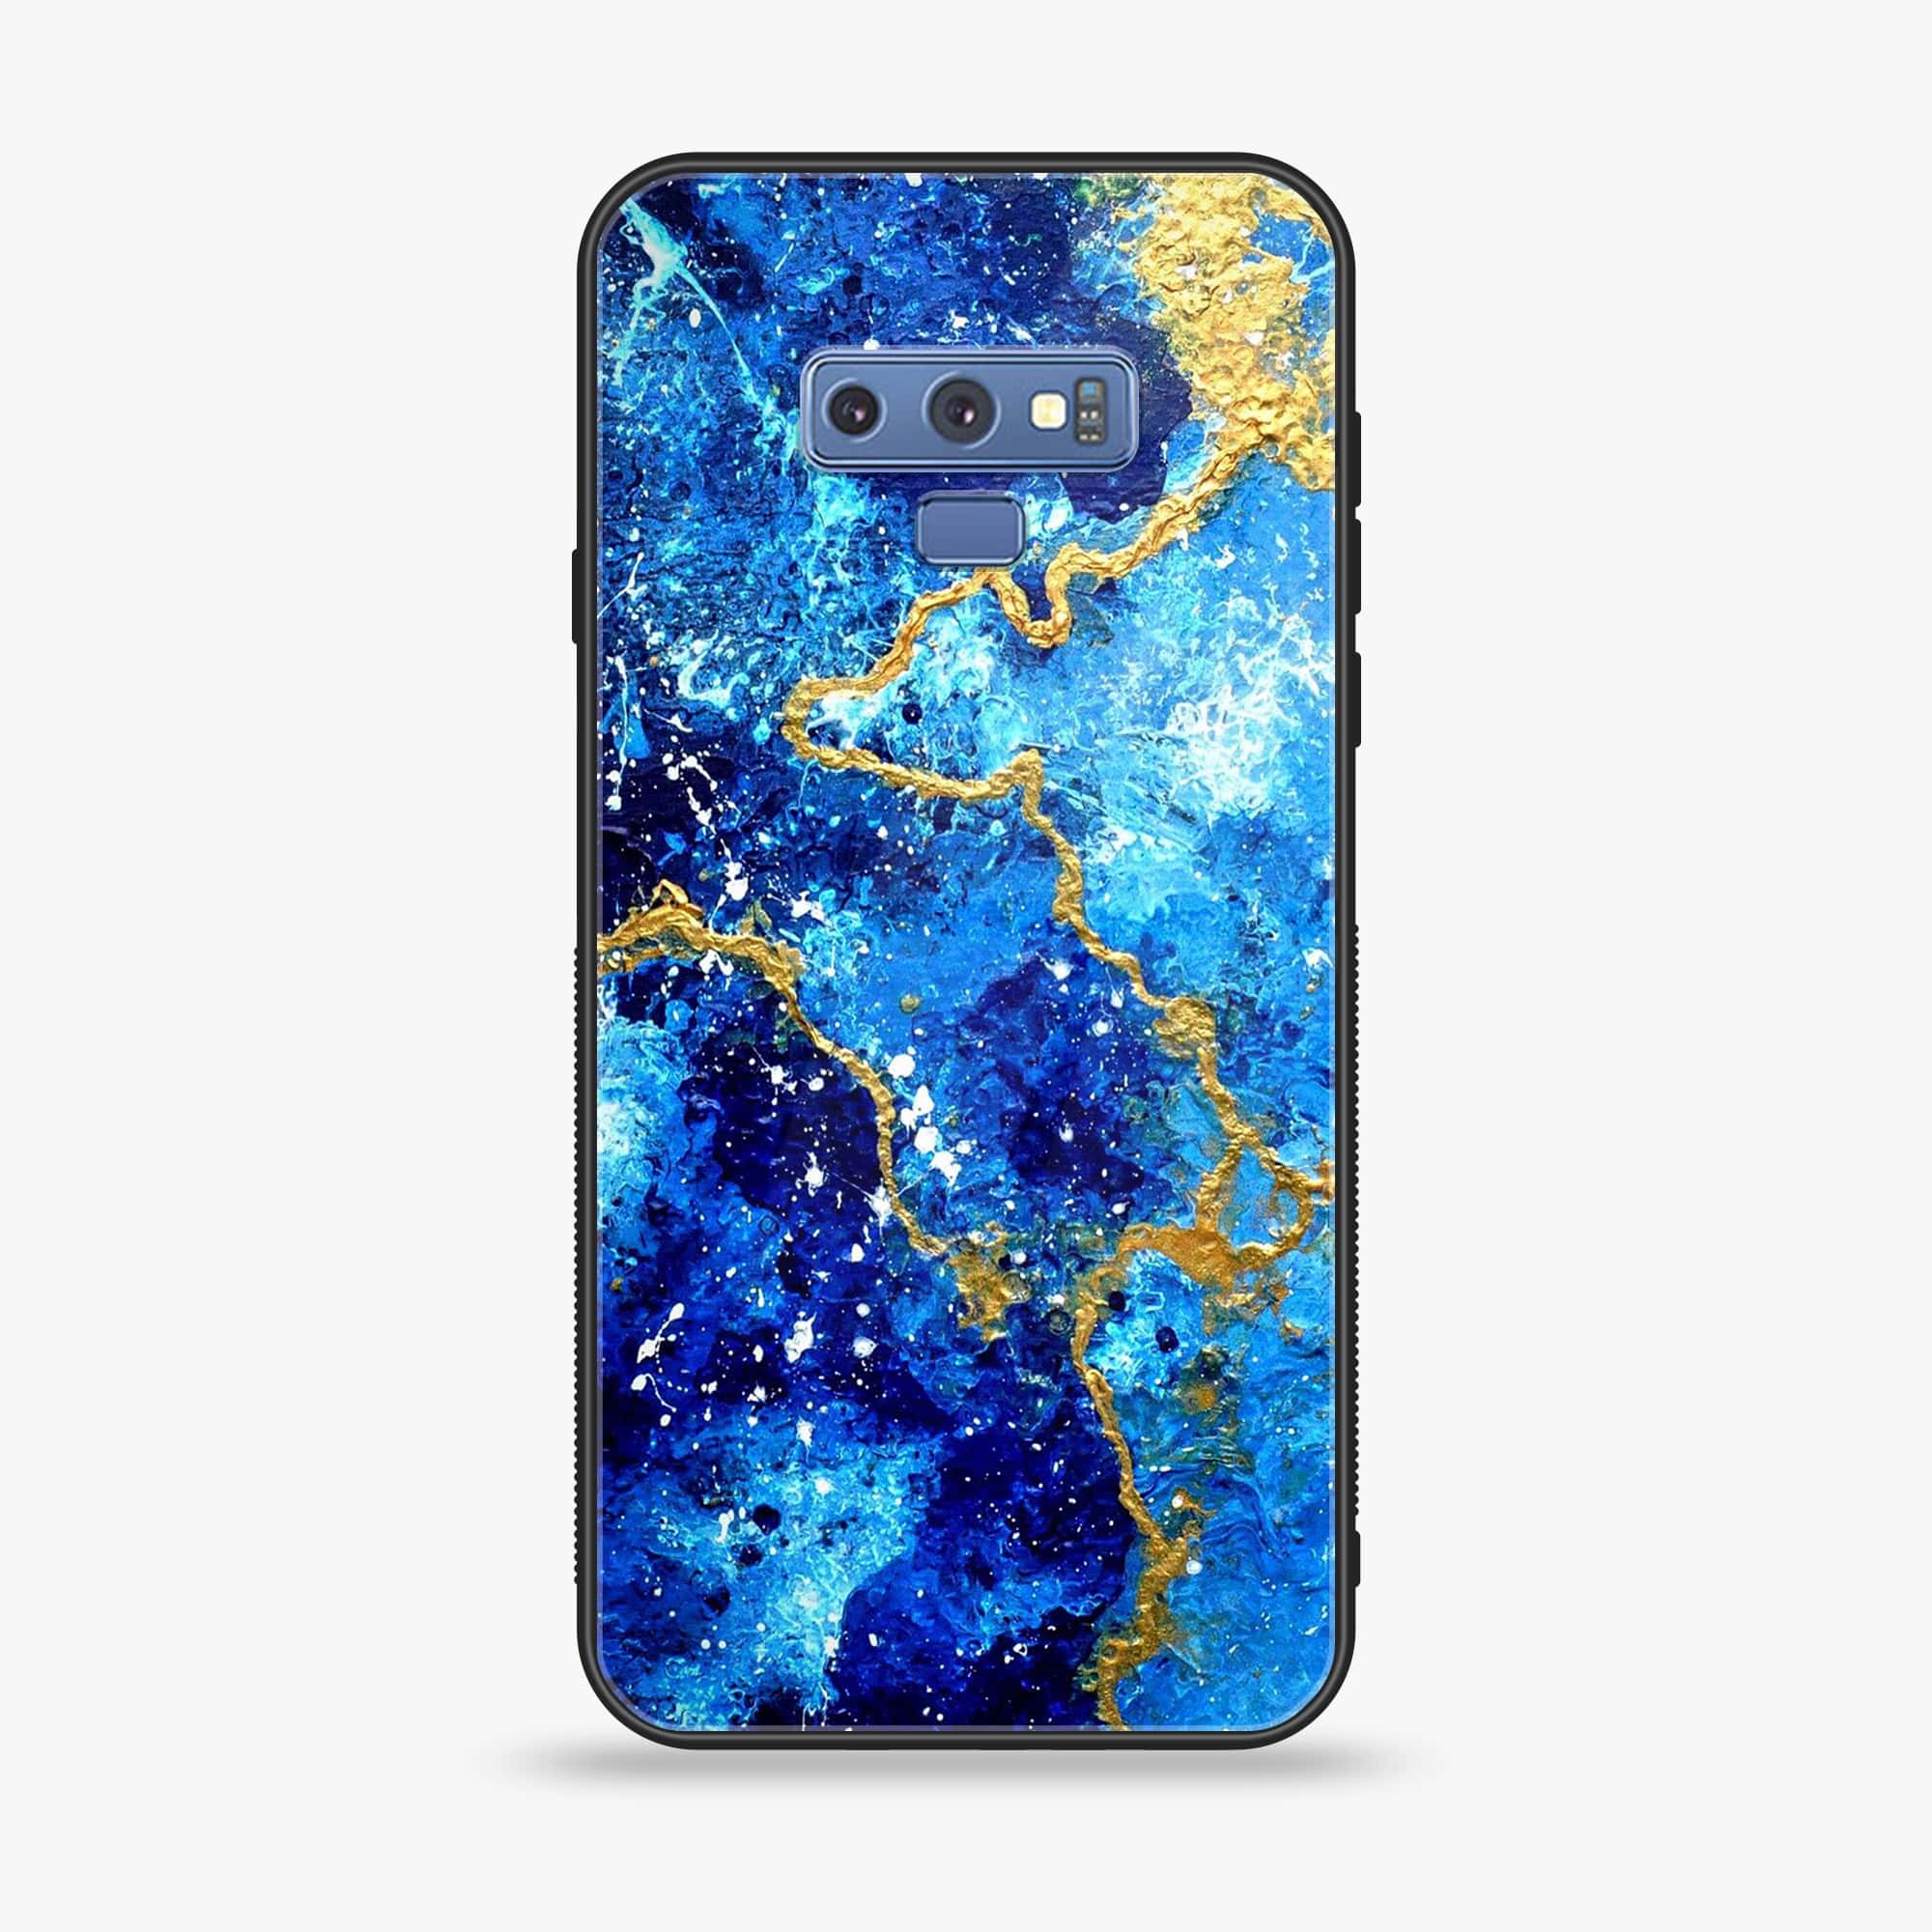 Samsung Galaxy Note 9 - Blue Marble Series V 2.0 - Premium Printed Glass soft Bumper shock Proof Case